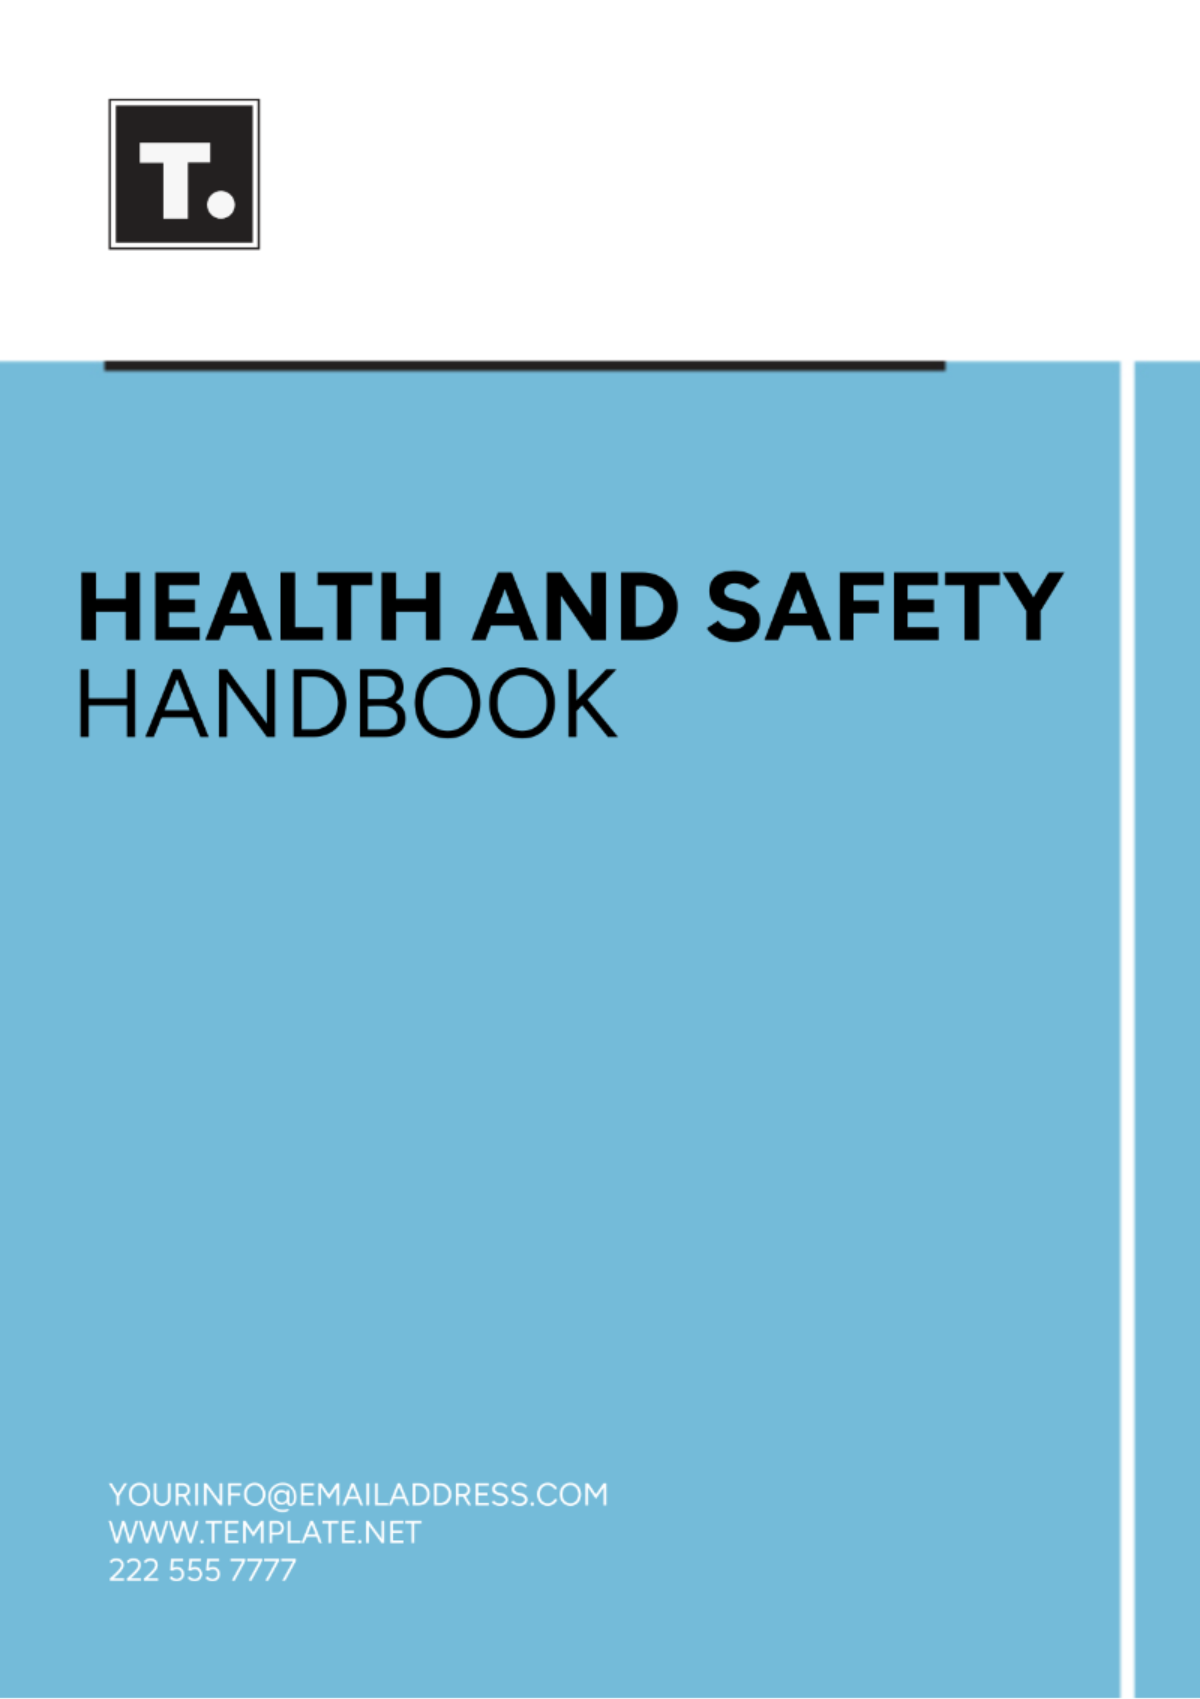 Free Health and Safety Handbook Template